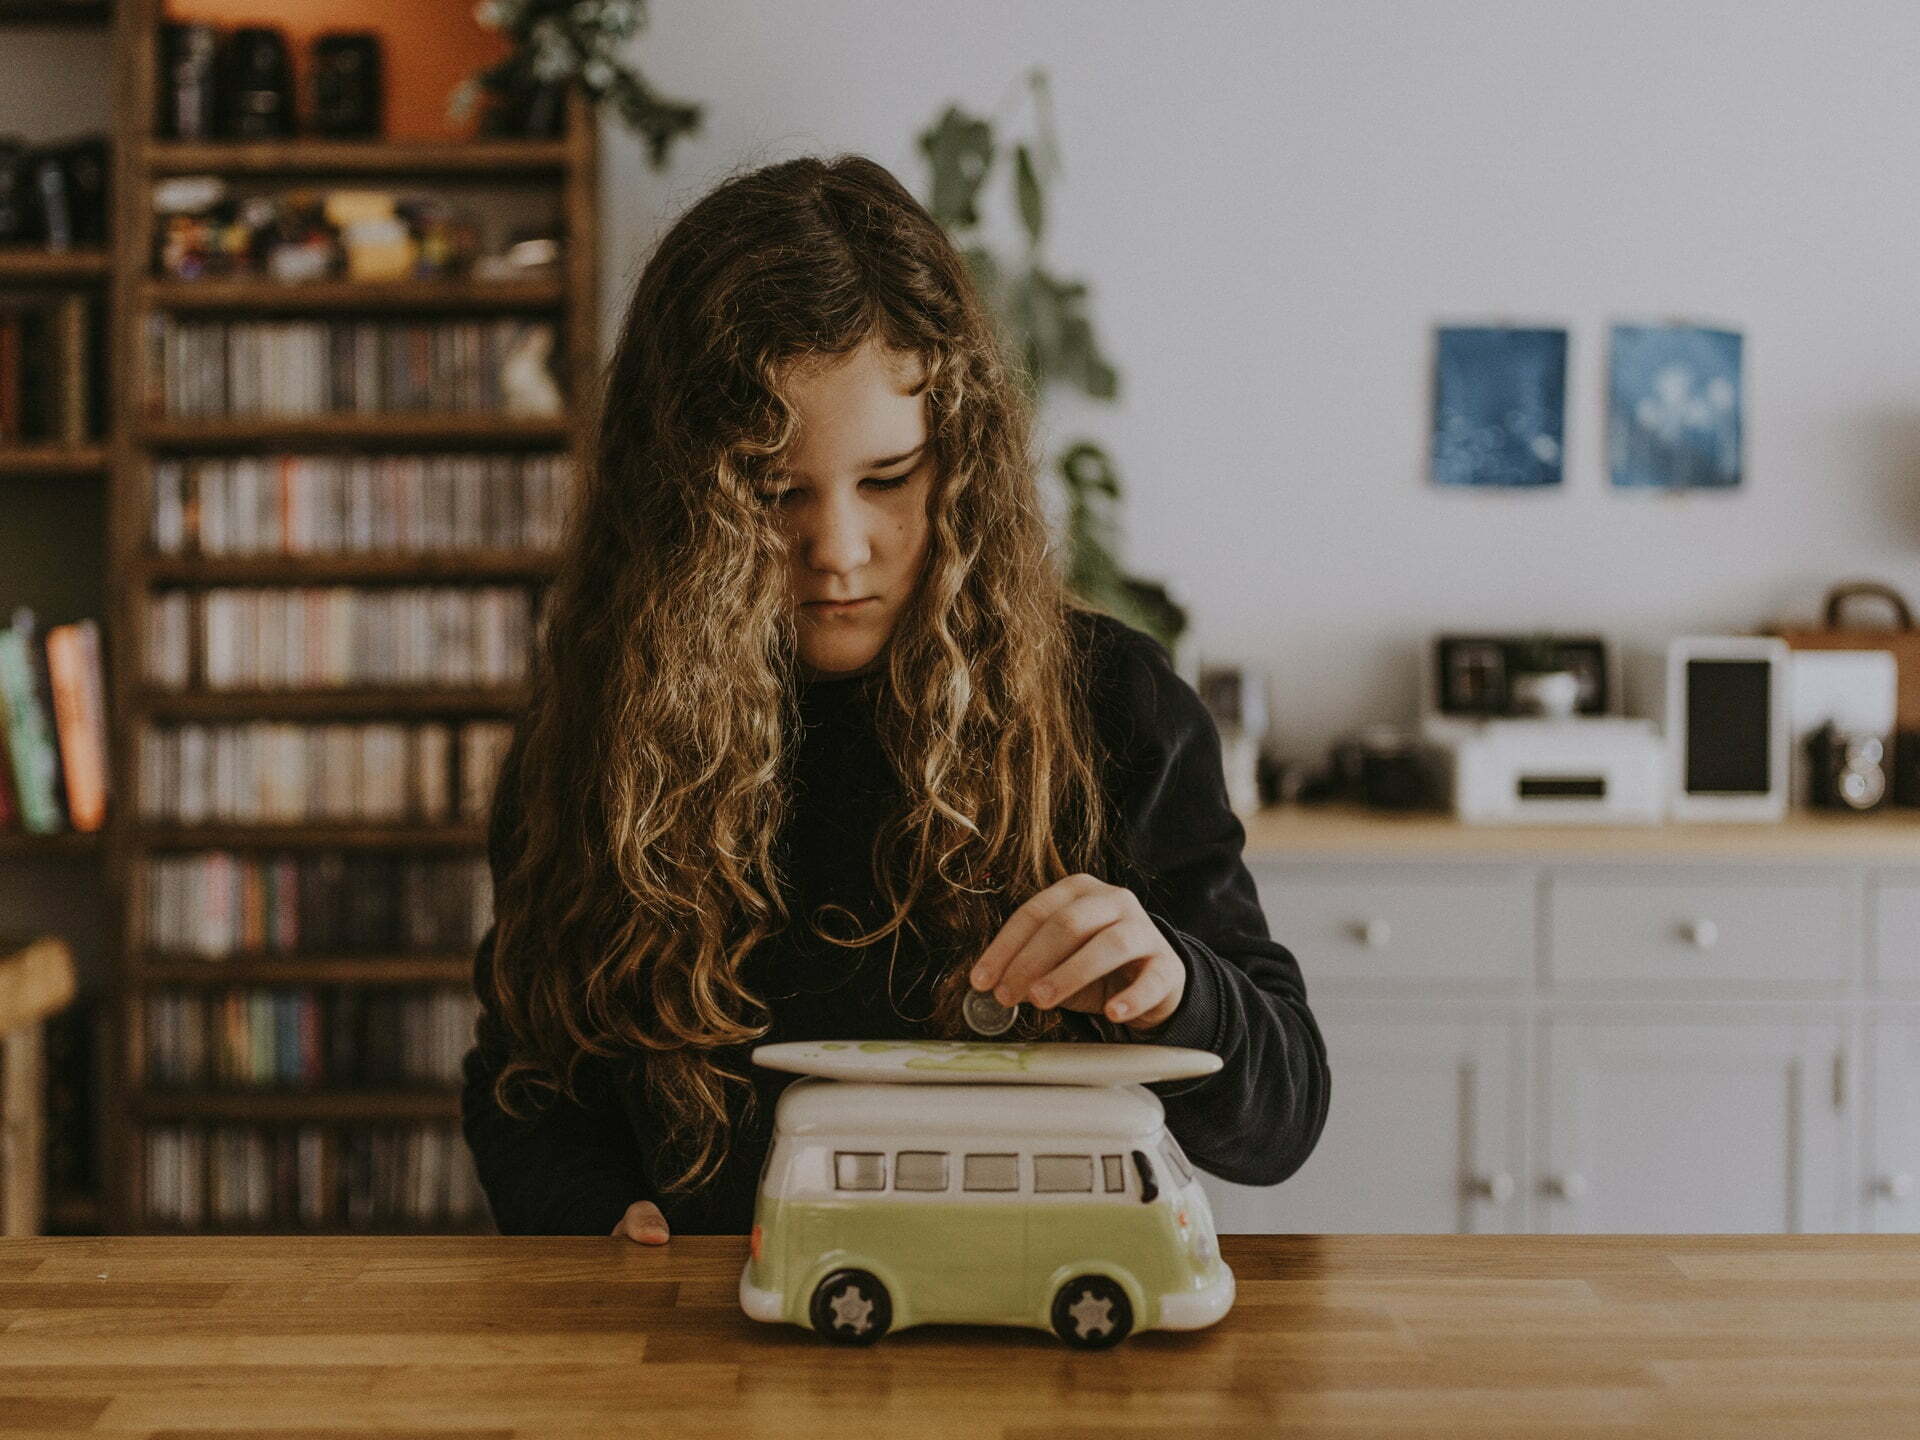 a person with long hair sitting at a desk with a toy car